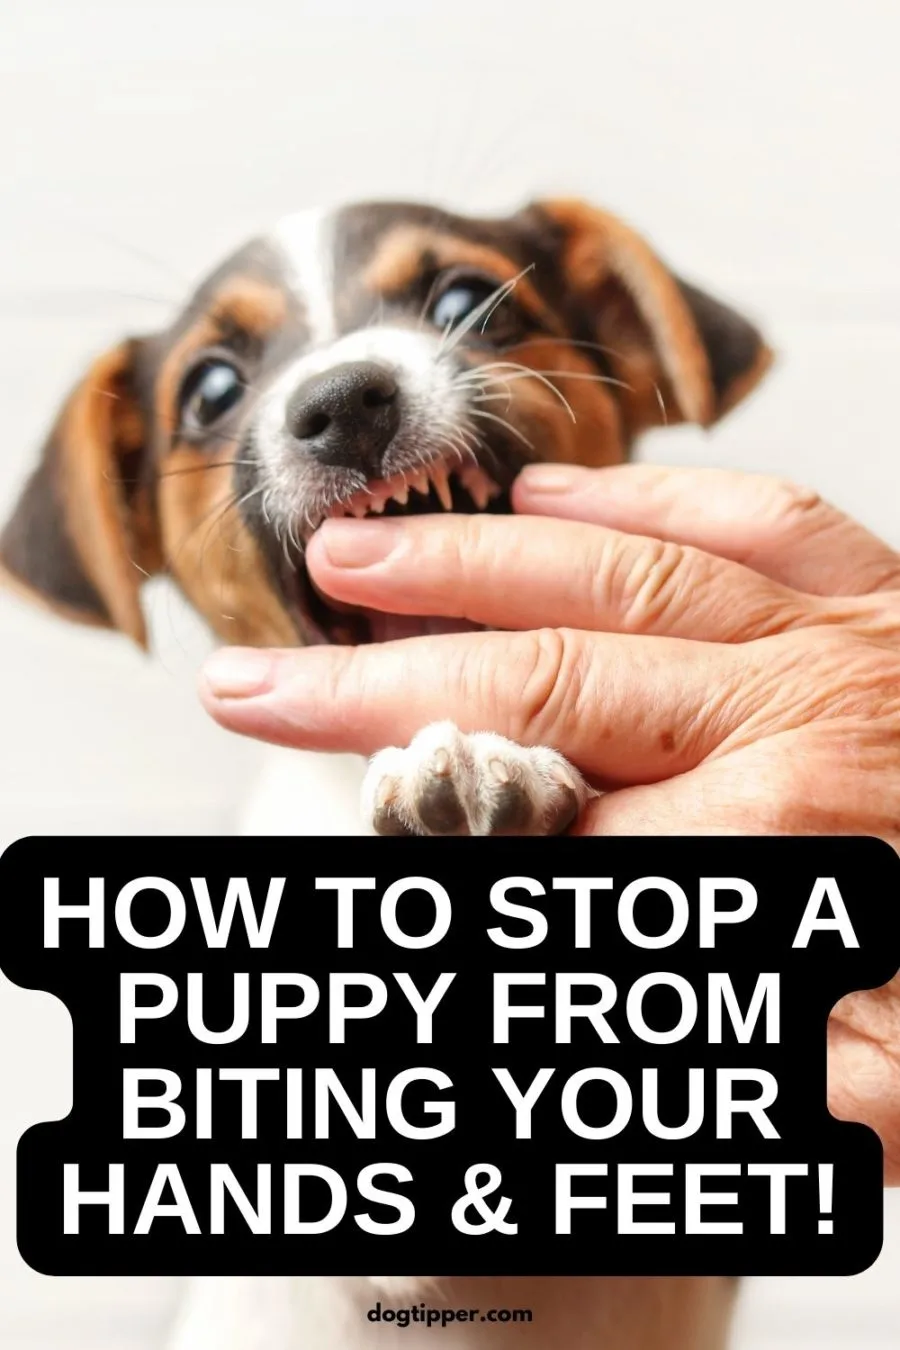 How to Stop a Puppy from Biting Your Hands & Feet!